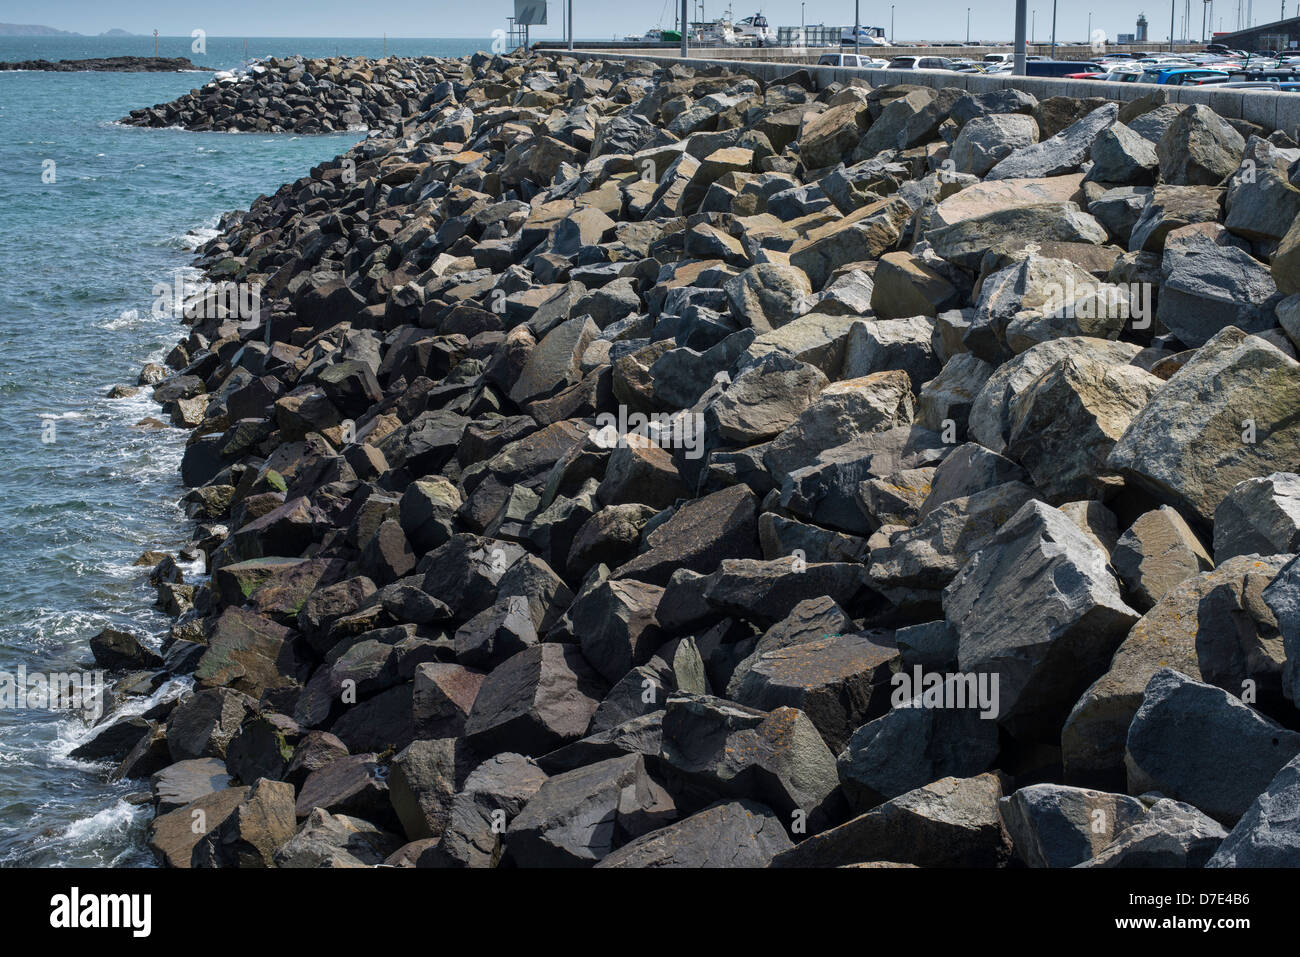 Rock armour sea defenses in St Peter Port, Guernsey. Stock Photo